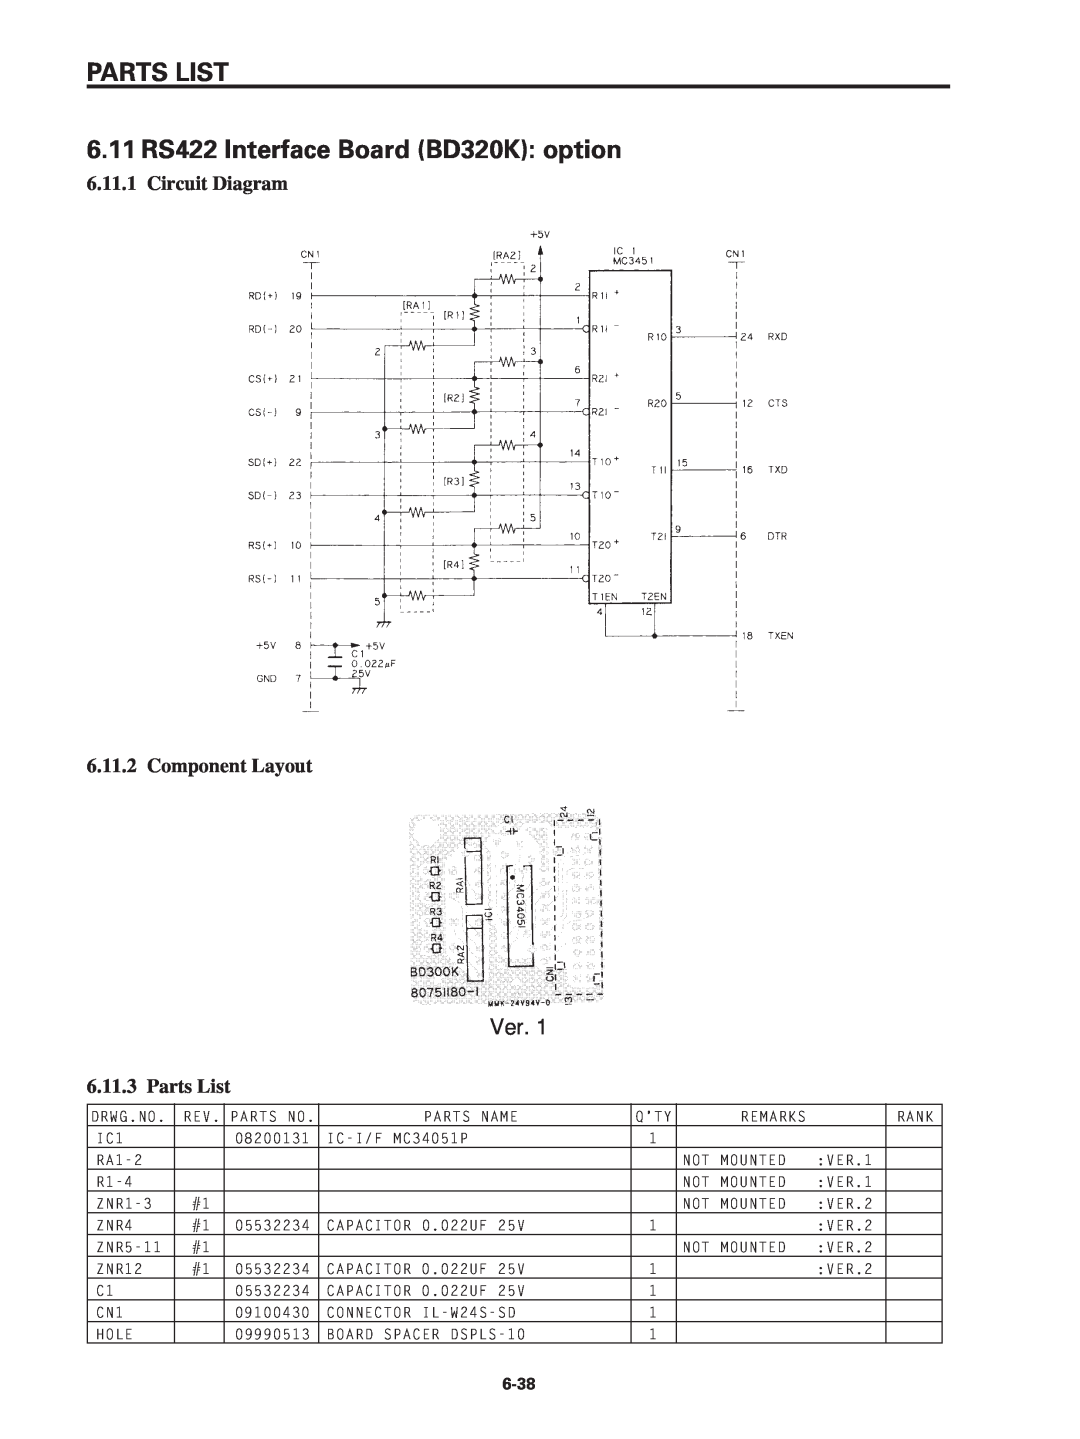 Star Micronics SP320S PARTS LIST 6.11 RS422 Interface Board BD320K option, Circuit Diagram 6.11.2 Component Layout 